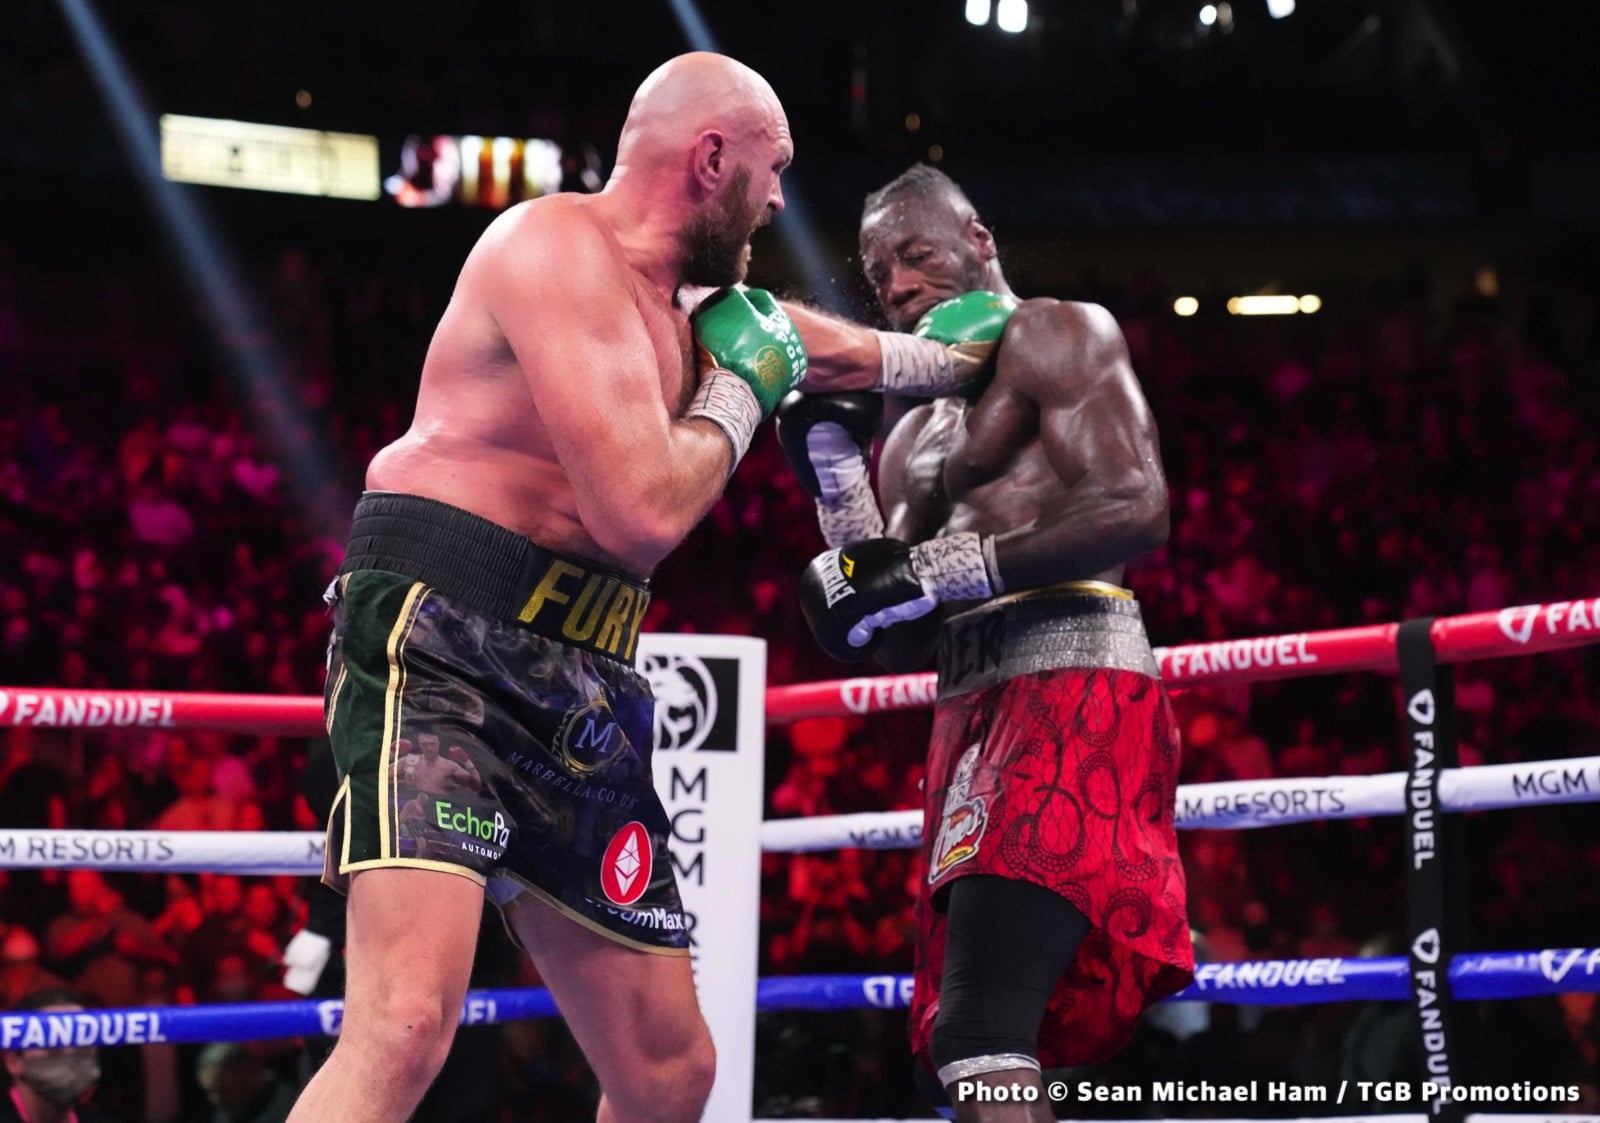 Image: Tyson Fury bent out of shape over Deontay Wilder not shaking his hand